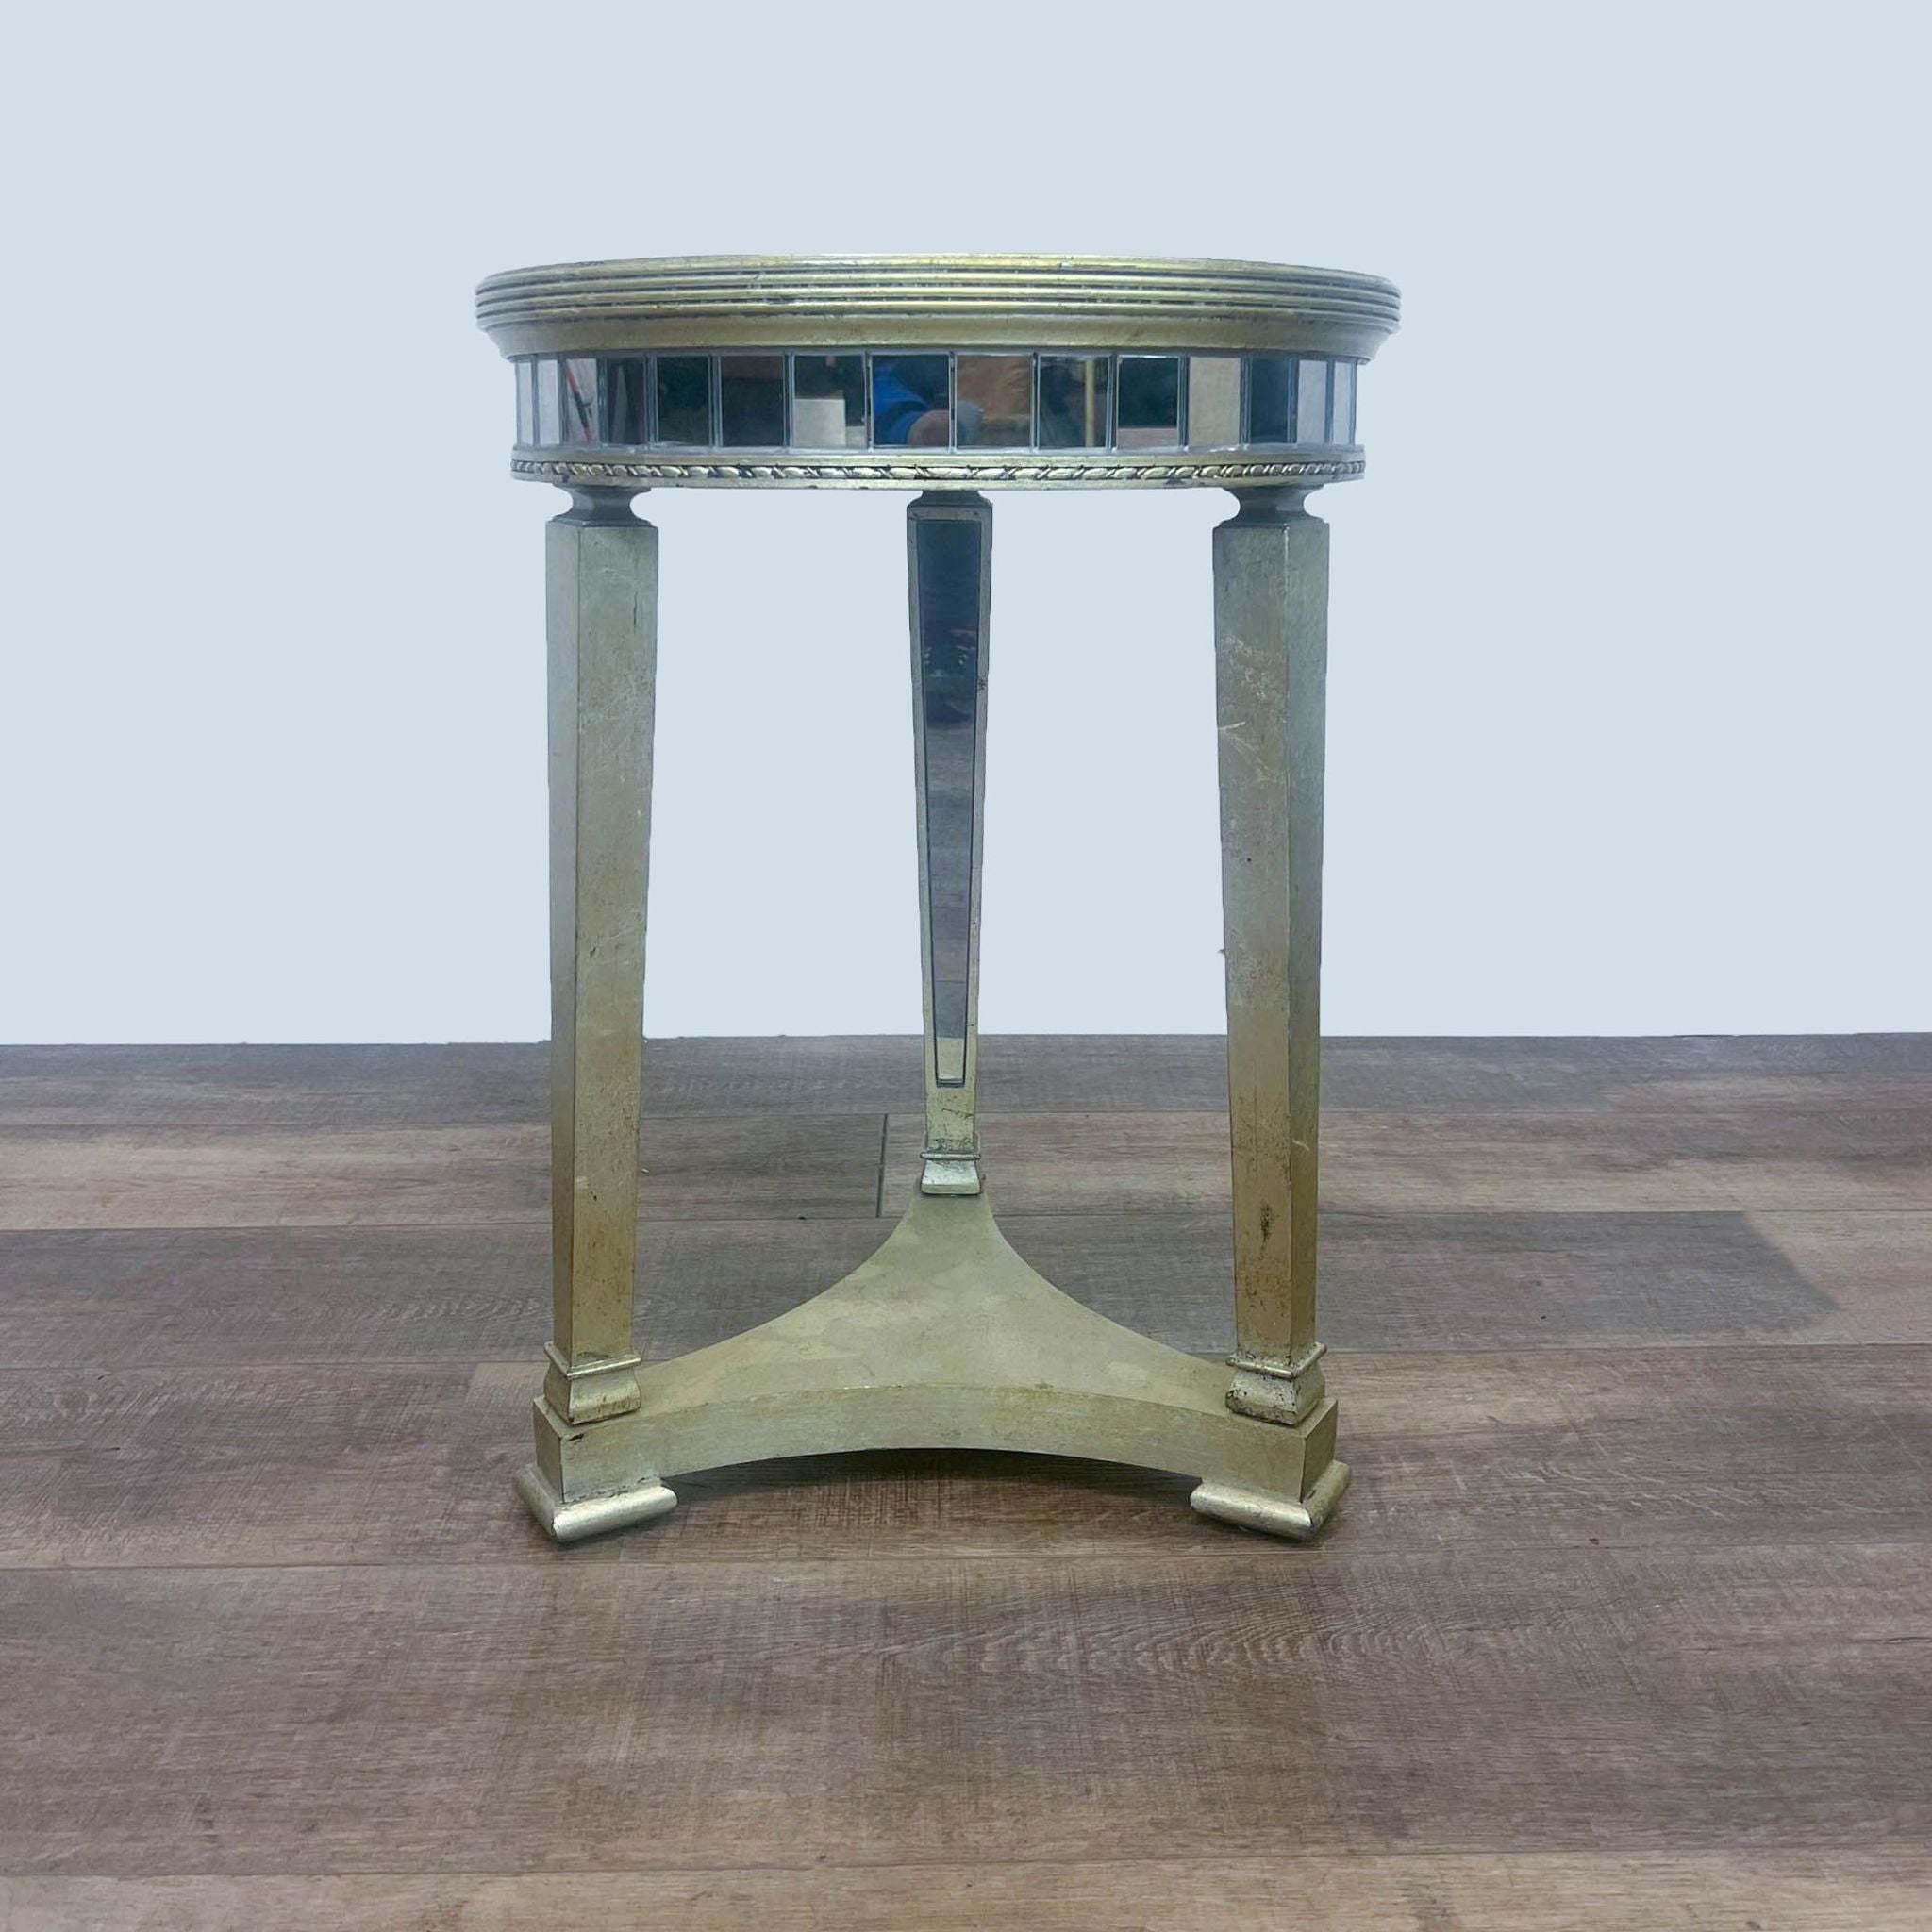 Reperch brand round console table with wood base and mirror top, side view on wooden flooring.